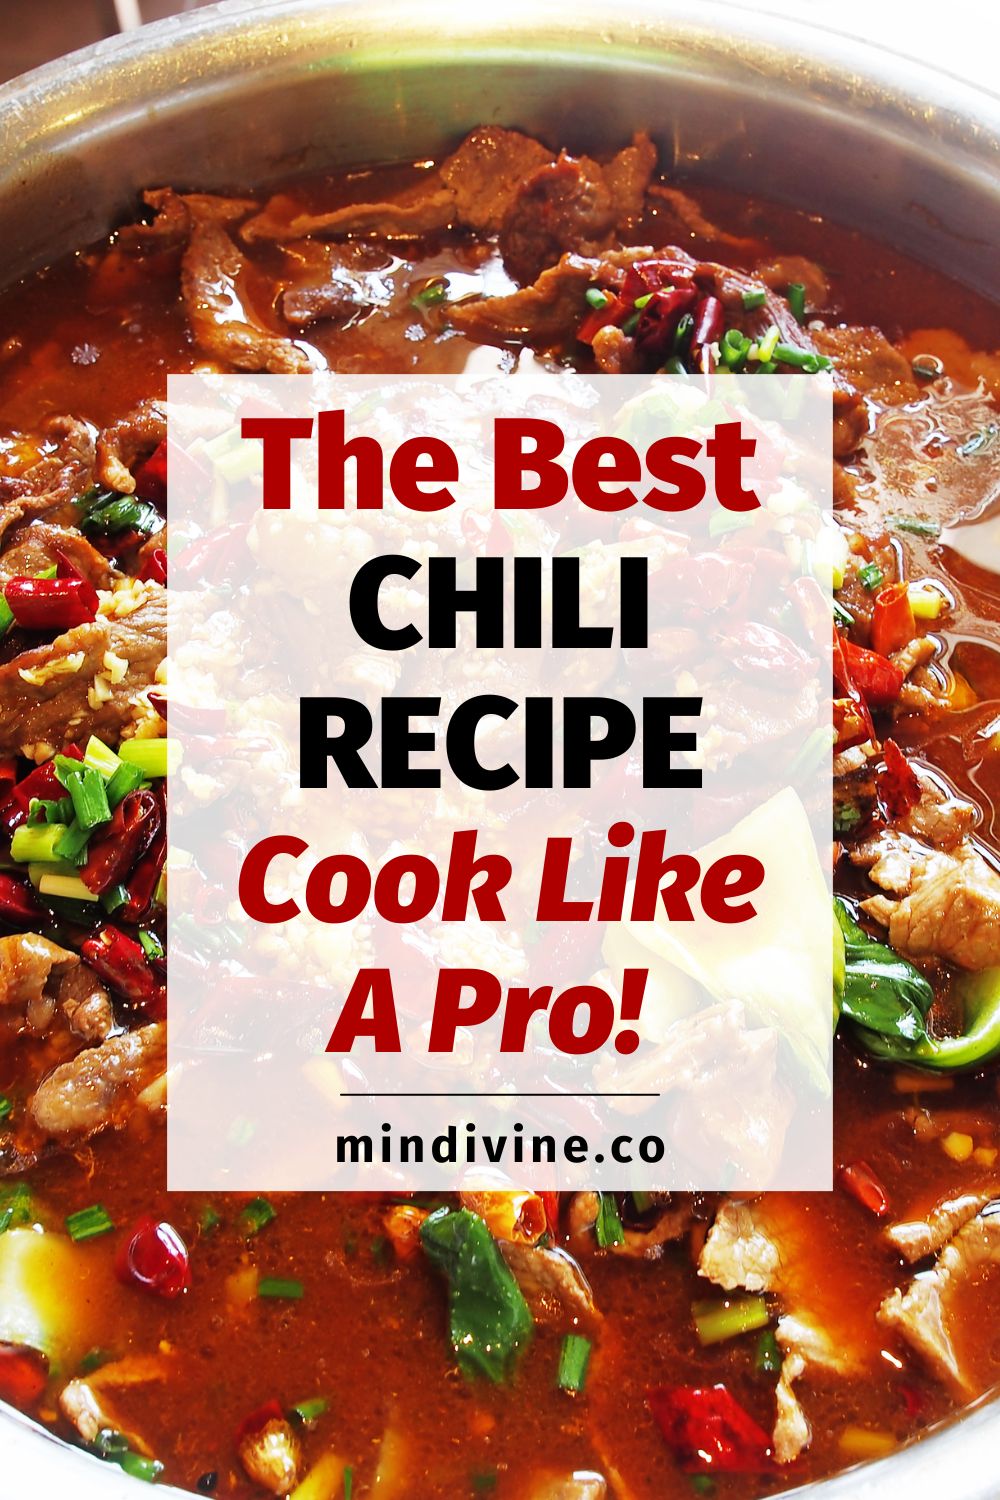 Dish with the best chili recipe.